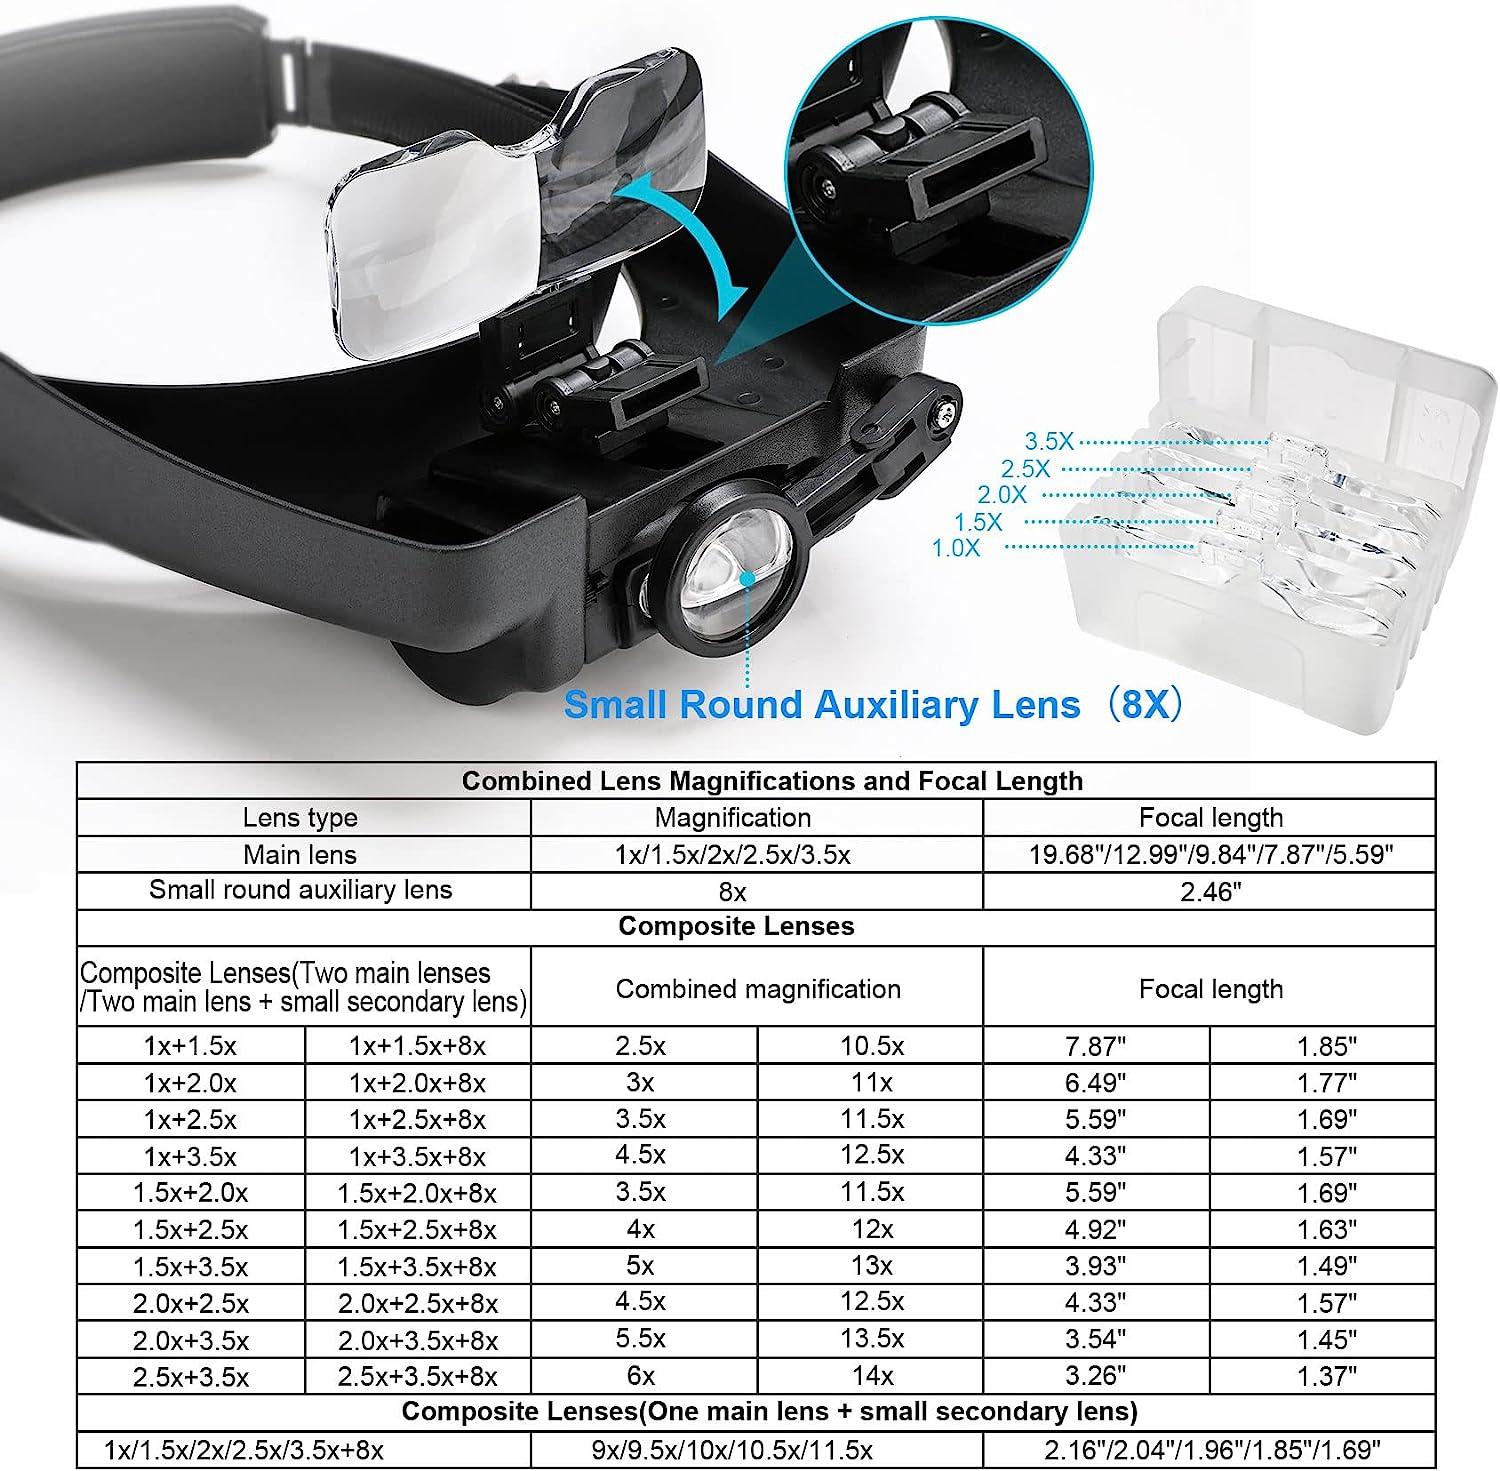 Magnifying Headset with Light